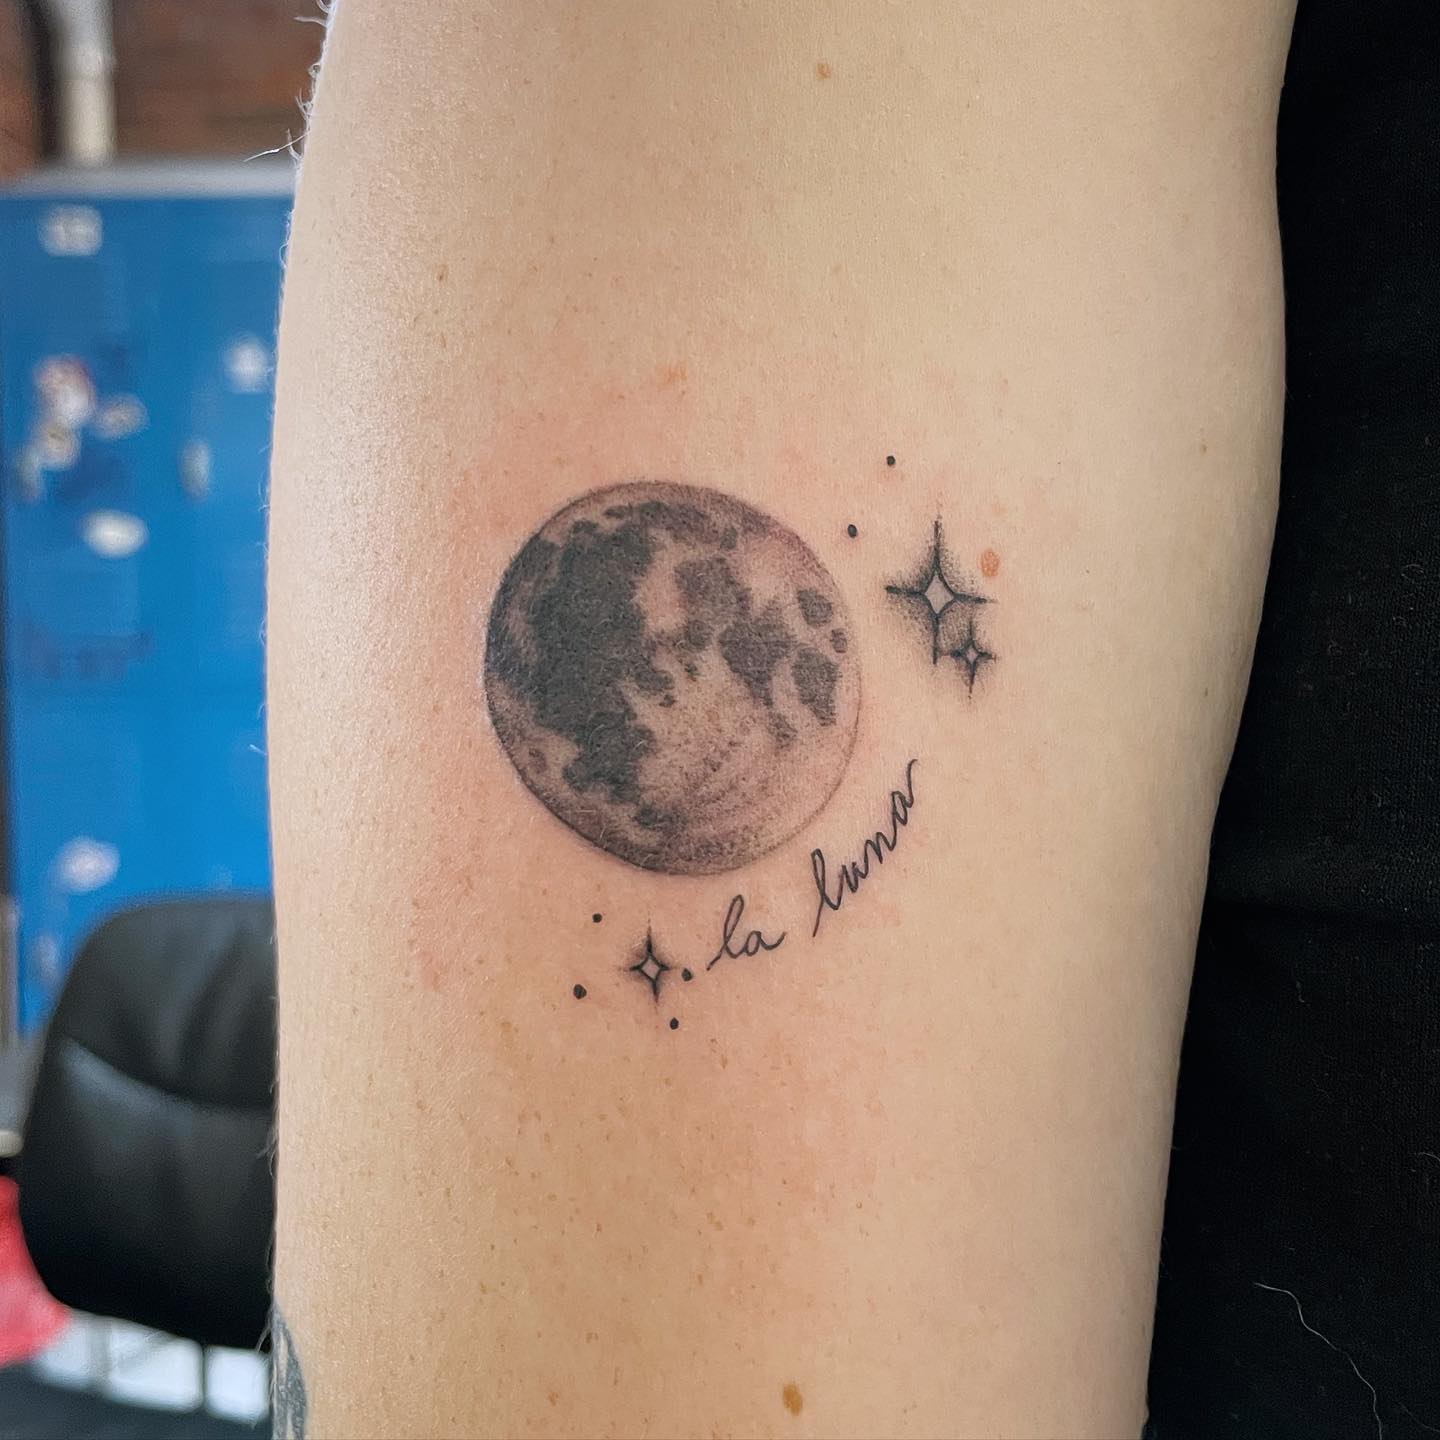 Tiny moon and star tattoo done on the ankle